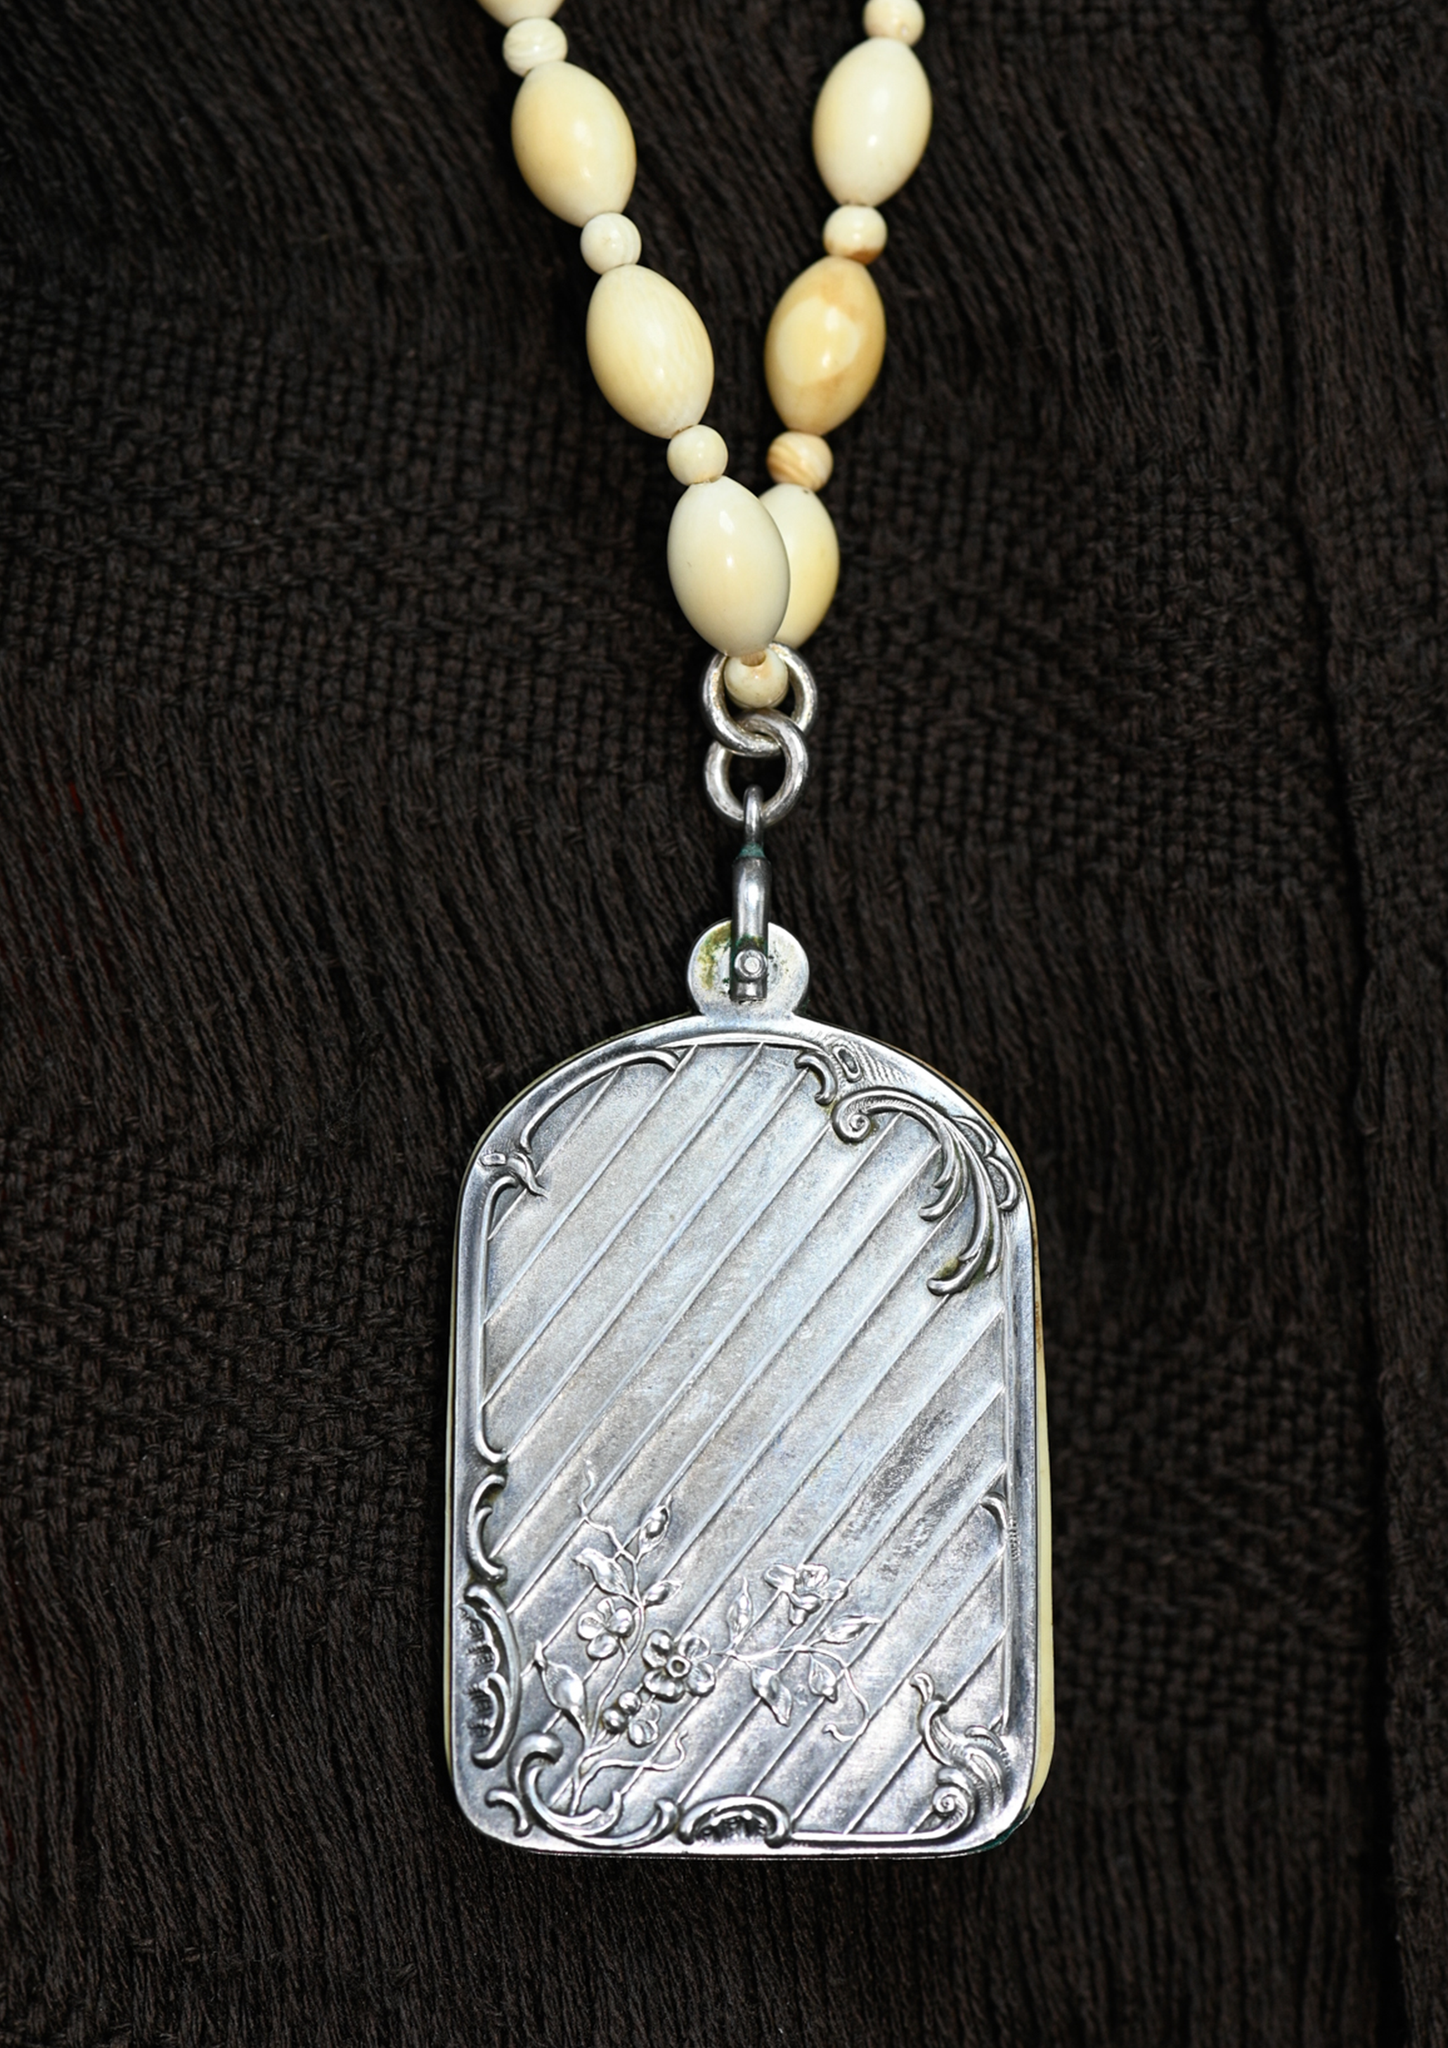 19th Century Ivorine Dance Card in Repousse Sterling Silver with Antique Ivory Bead Necklace